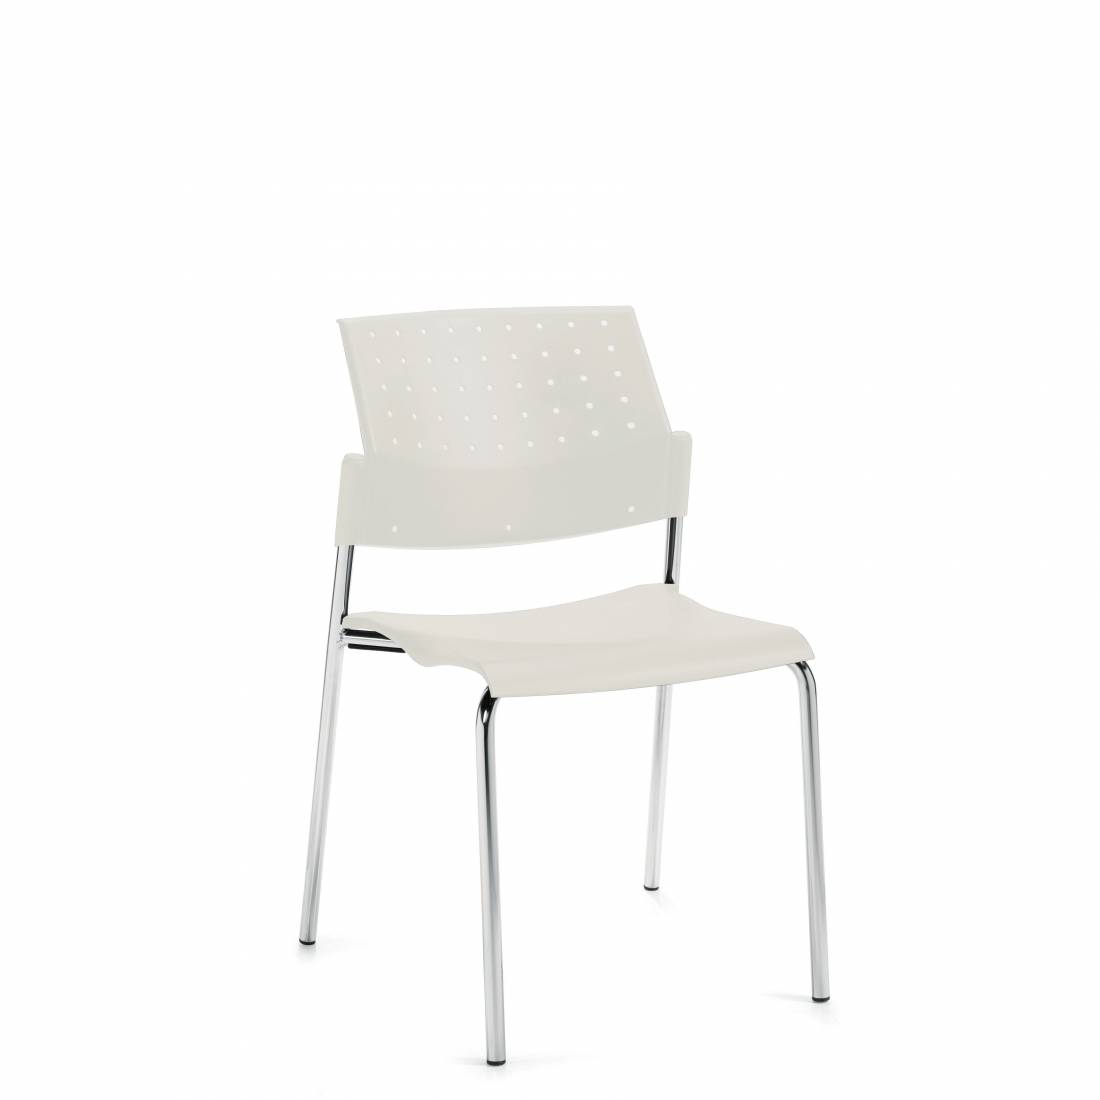 Armless Stacking Chair, Polypropylene Seat & Back